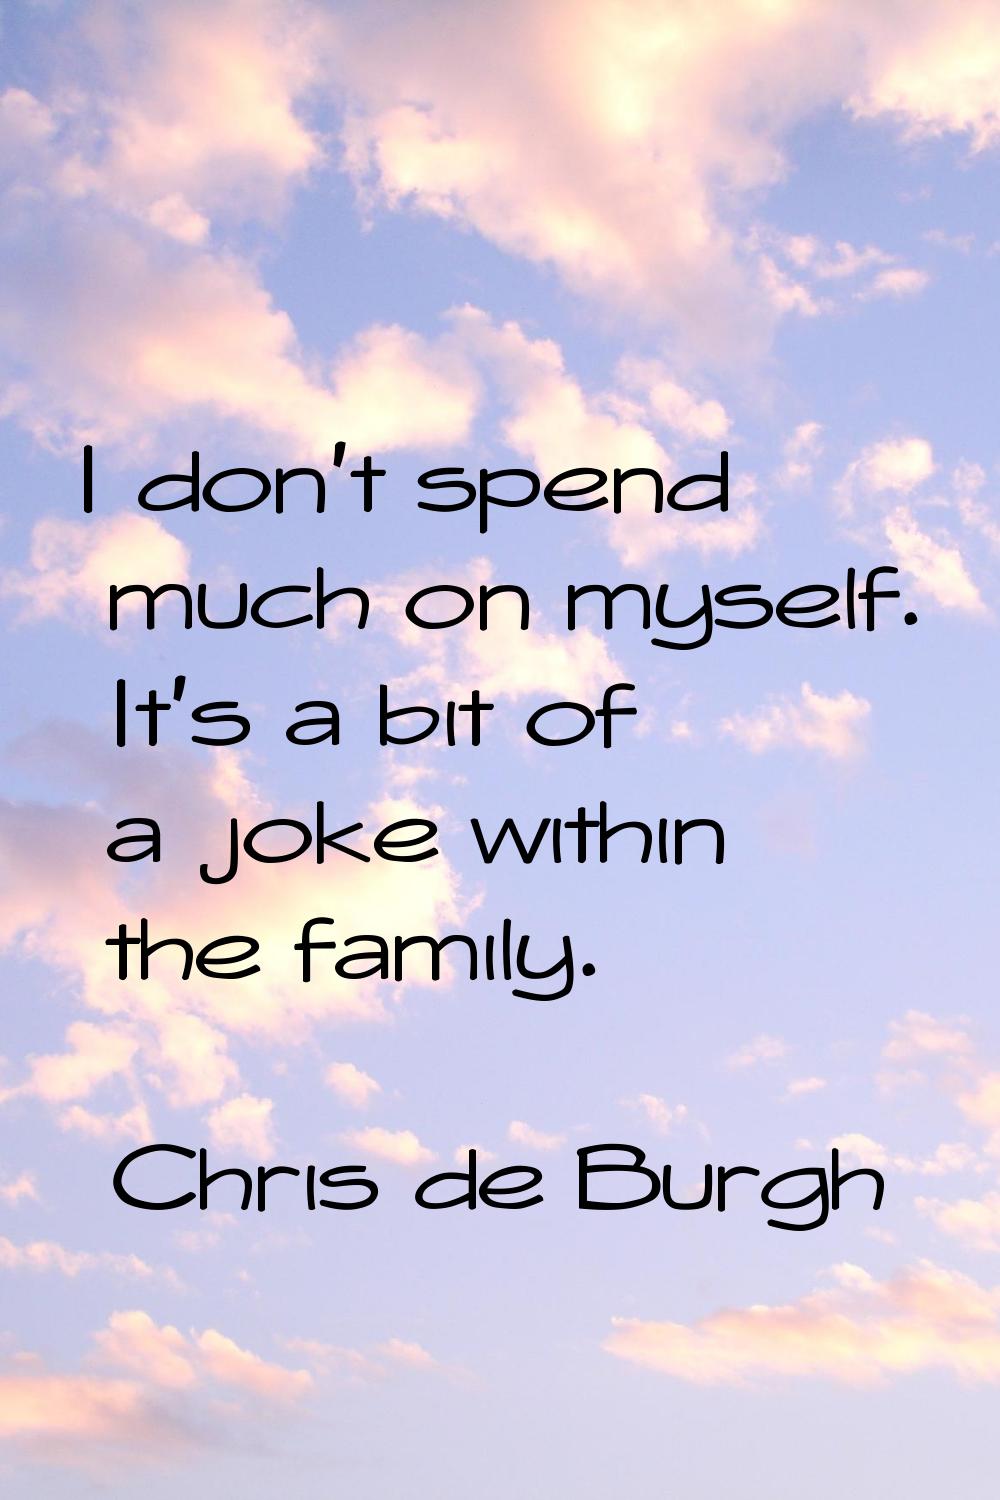 I don't spend much on myself. It's a bit of a joke within the family.